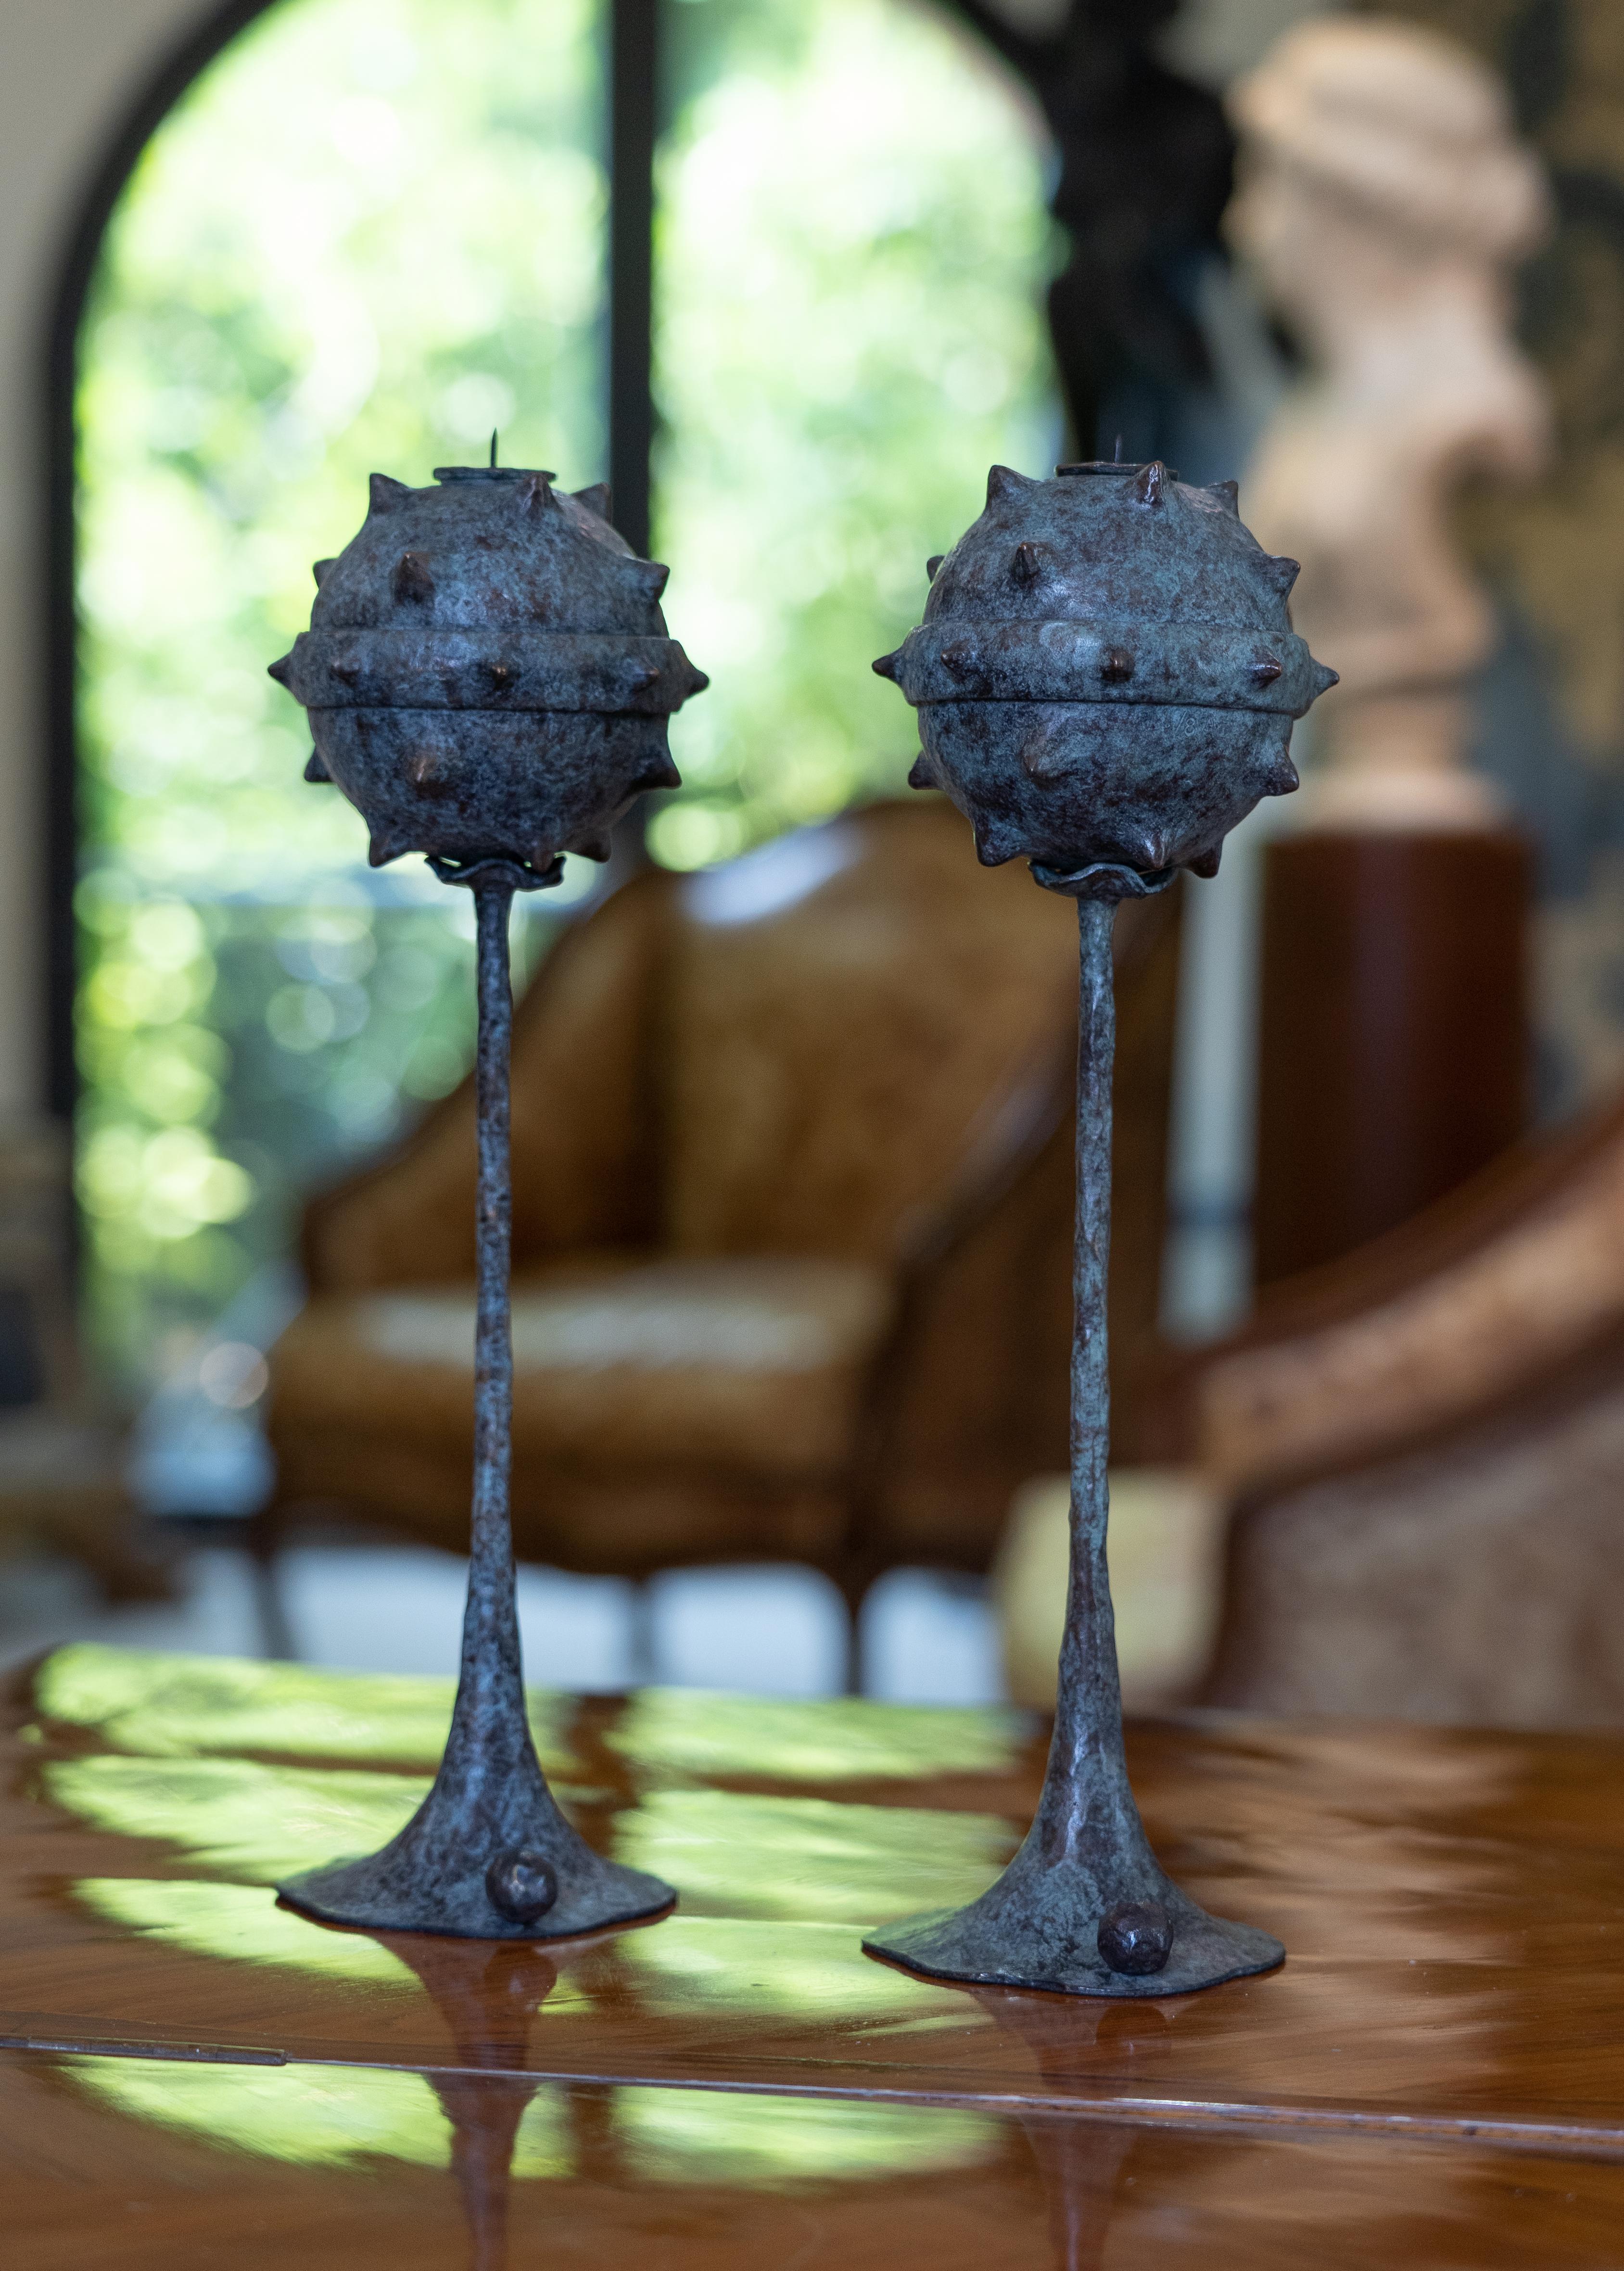 Set of two bronze candlesticks by Emanuele Colombi.
Limited Edition 
Roma Collection 2022 PRIMUS SMALL

Materials: bronze
Finishes: vert de gris patine base and globe (VG) (Number 1 of 12)

Various finishes and sizes available

Italian